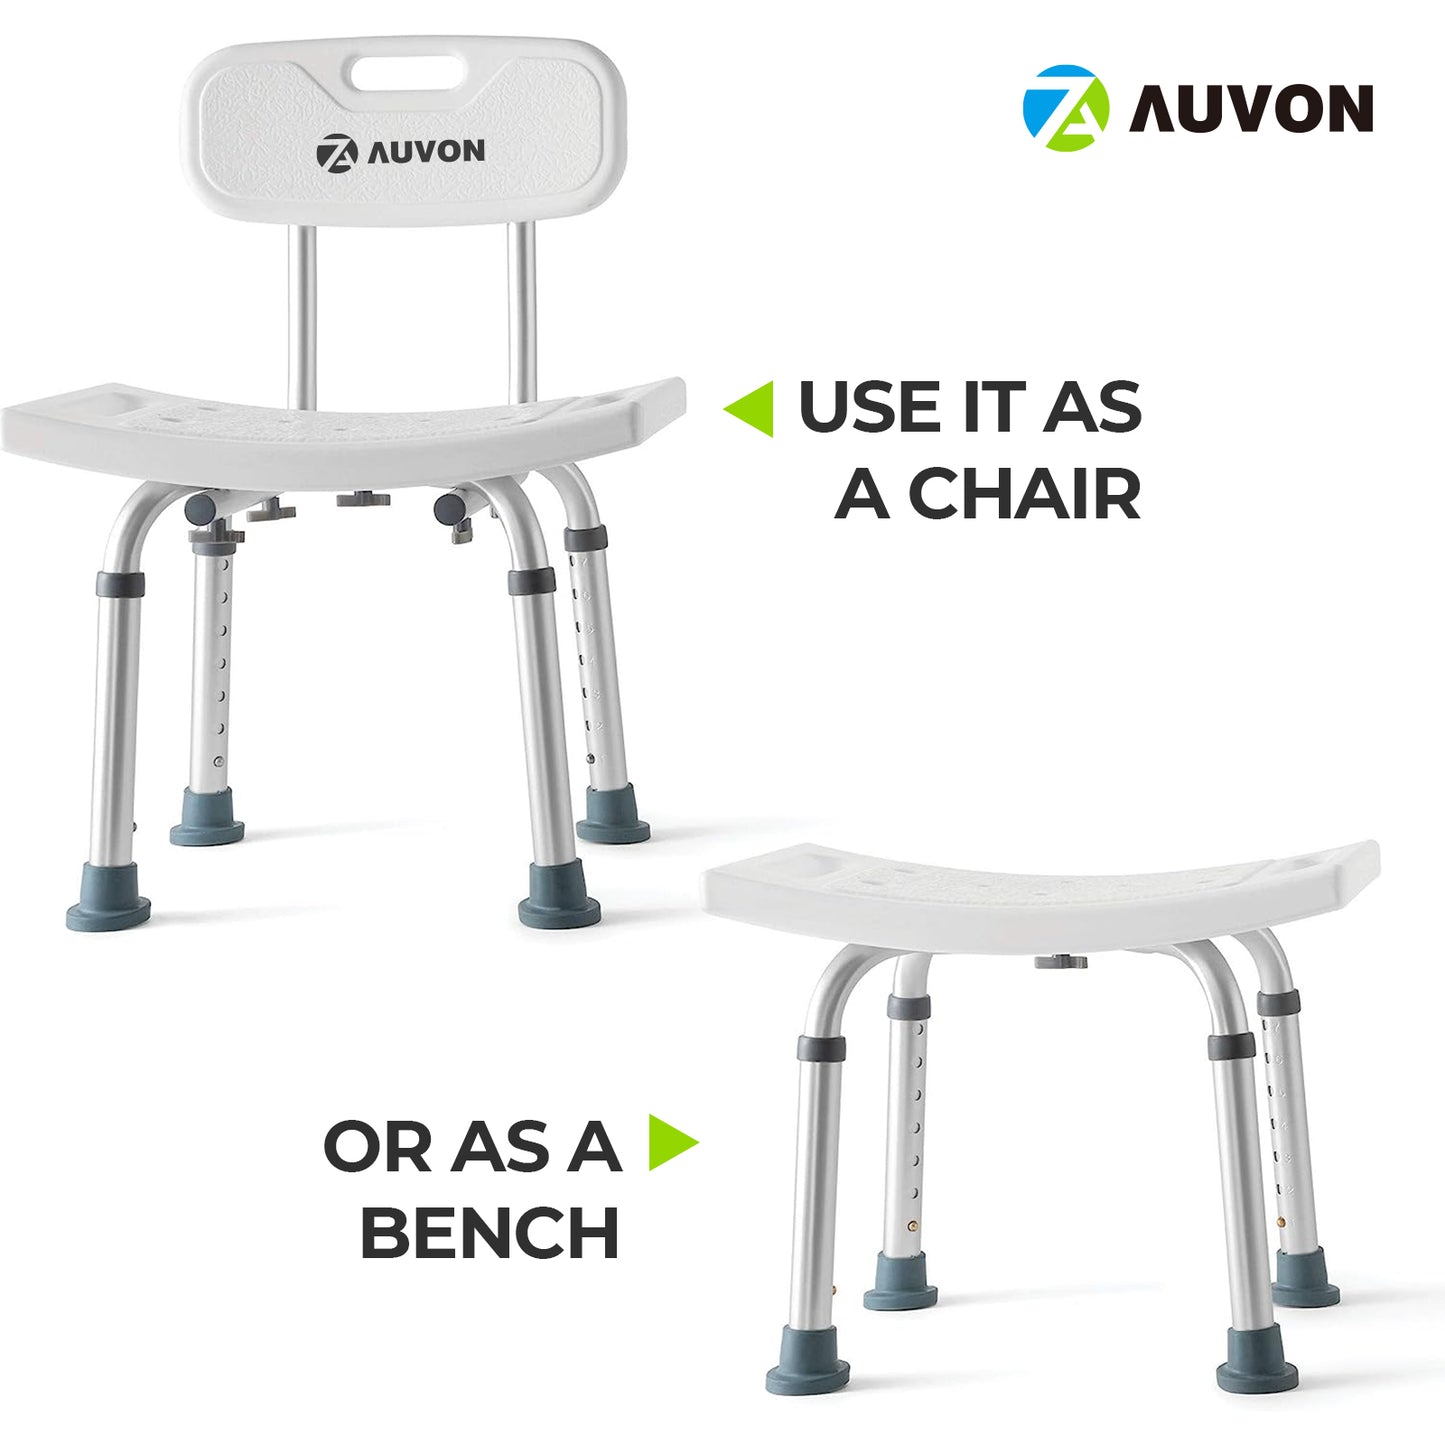 AUVON Shower Seats - Includes Back Scrubber & Additional Sponge - Anti Slip for Safety, with 8 Adjustable Heights Portable - Tool Free Shower Chair for Elderly - Bath Chair for Elderly